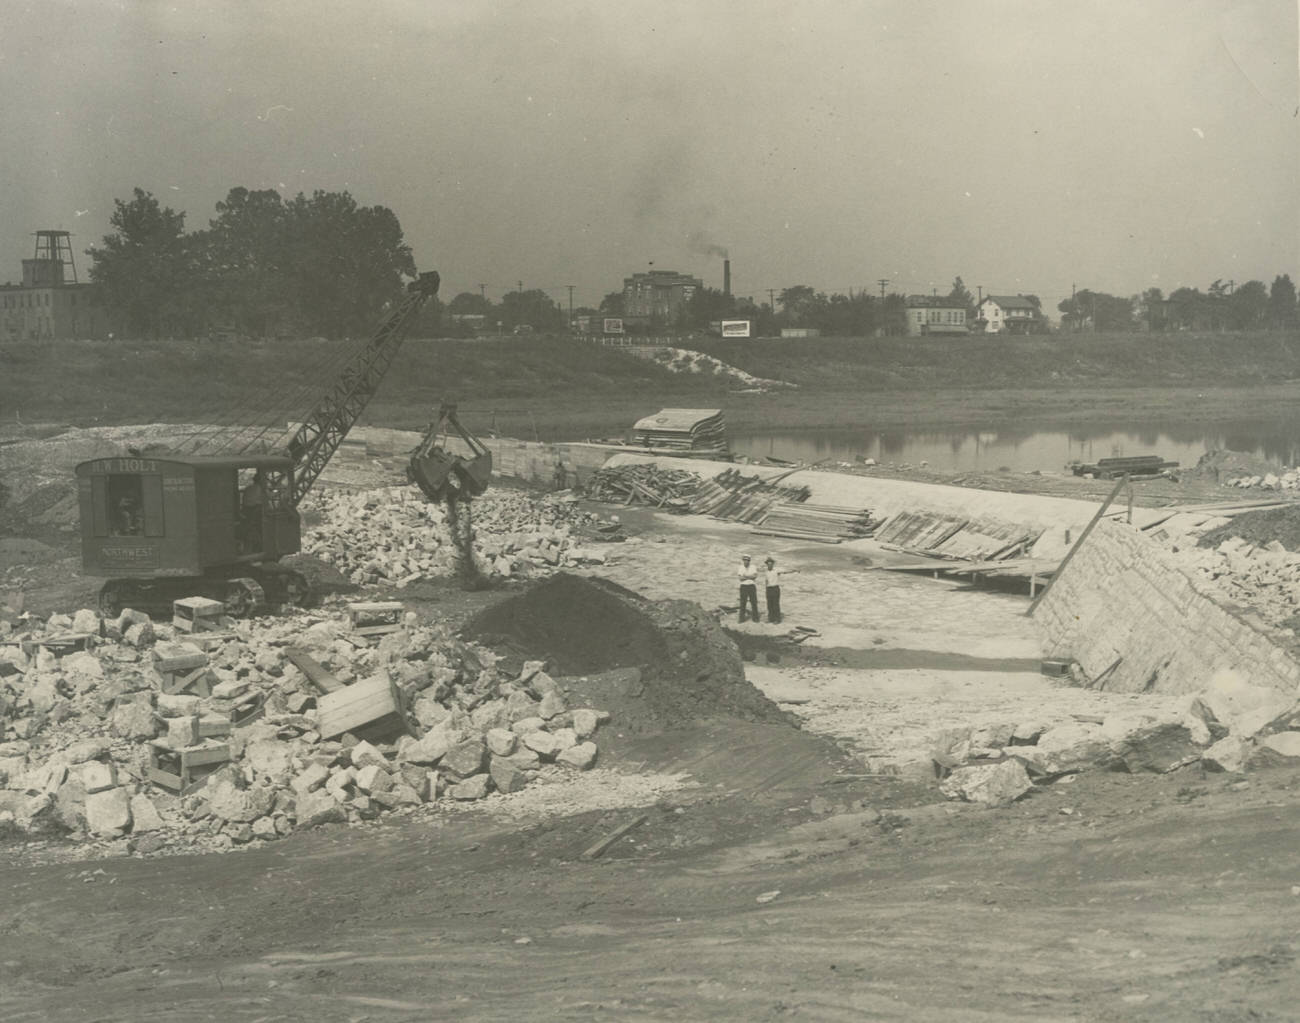 Construction views of the Fifth Avenue Dam over the Olentangy River, 1935.